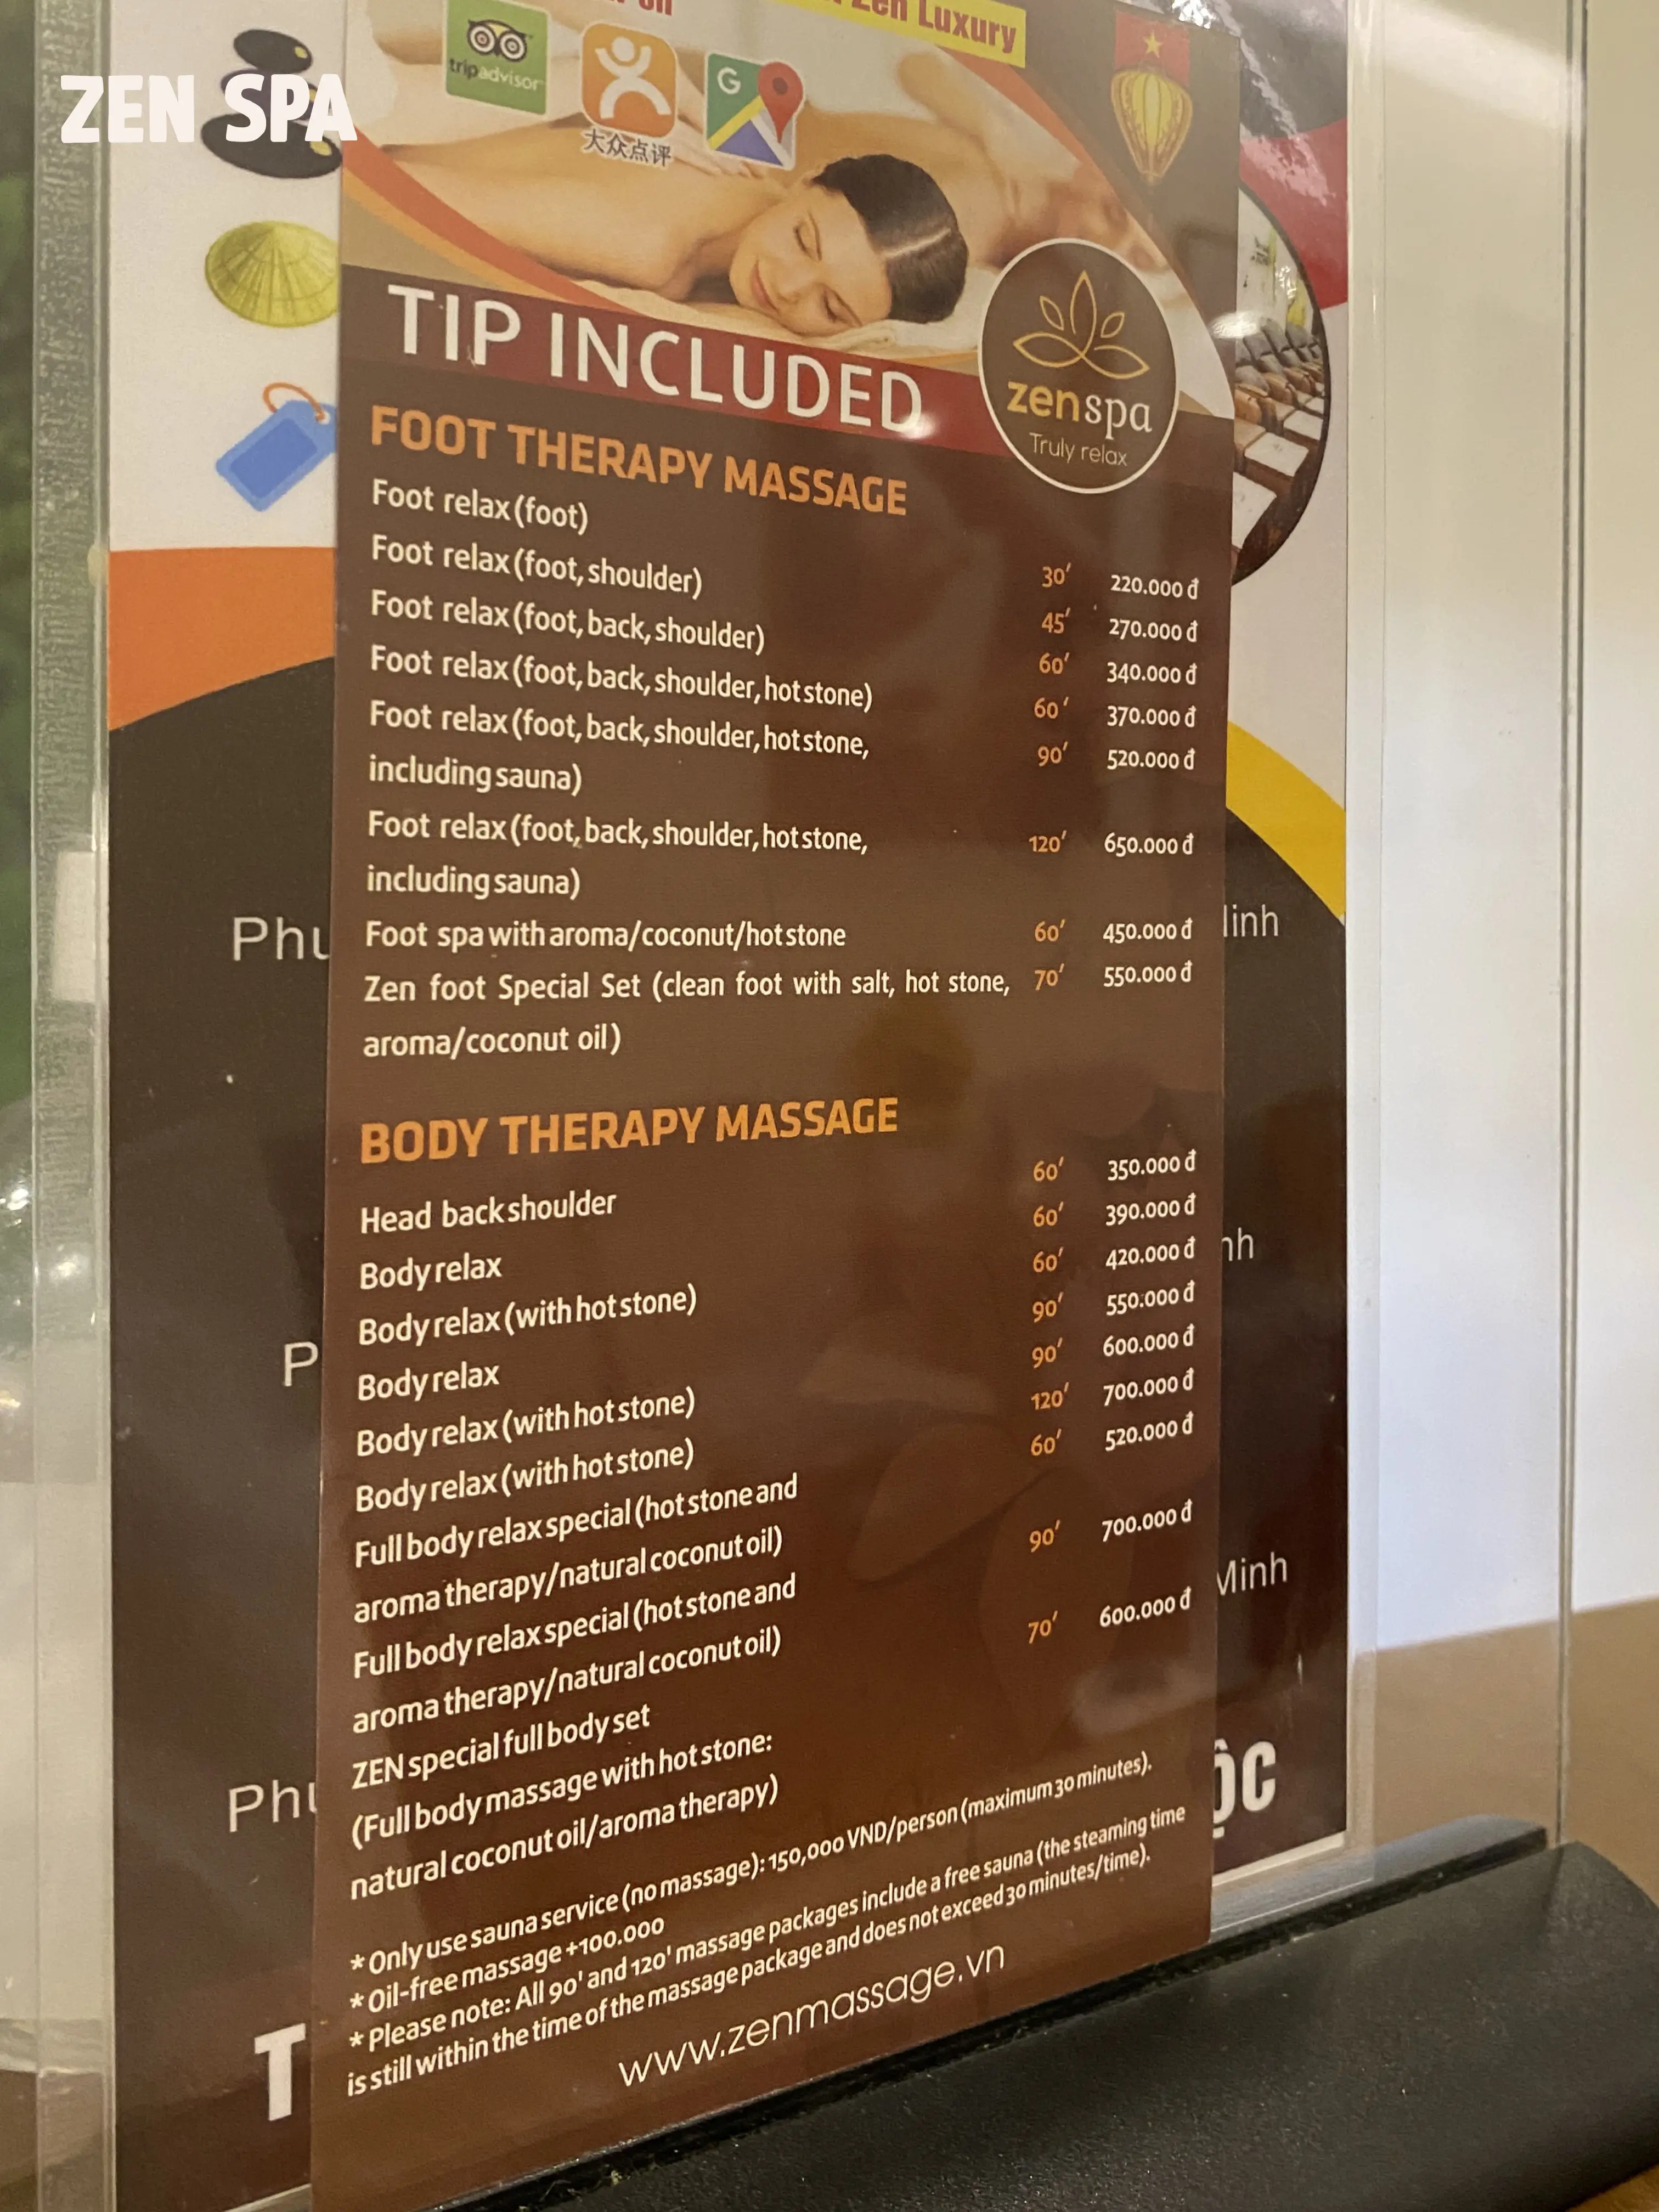 cheap and good massage spots in ho chi minh! 💆‍♀️'s images(5)